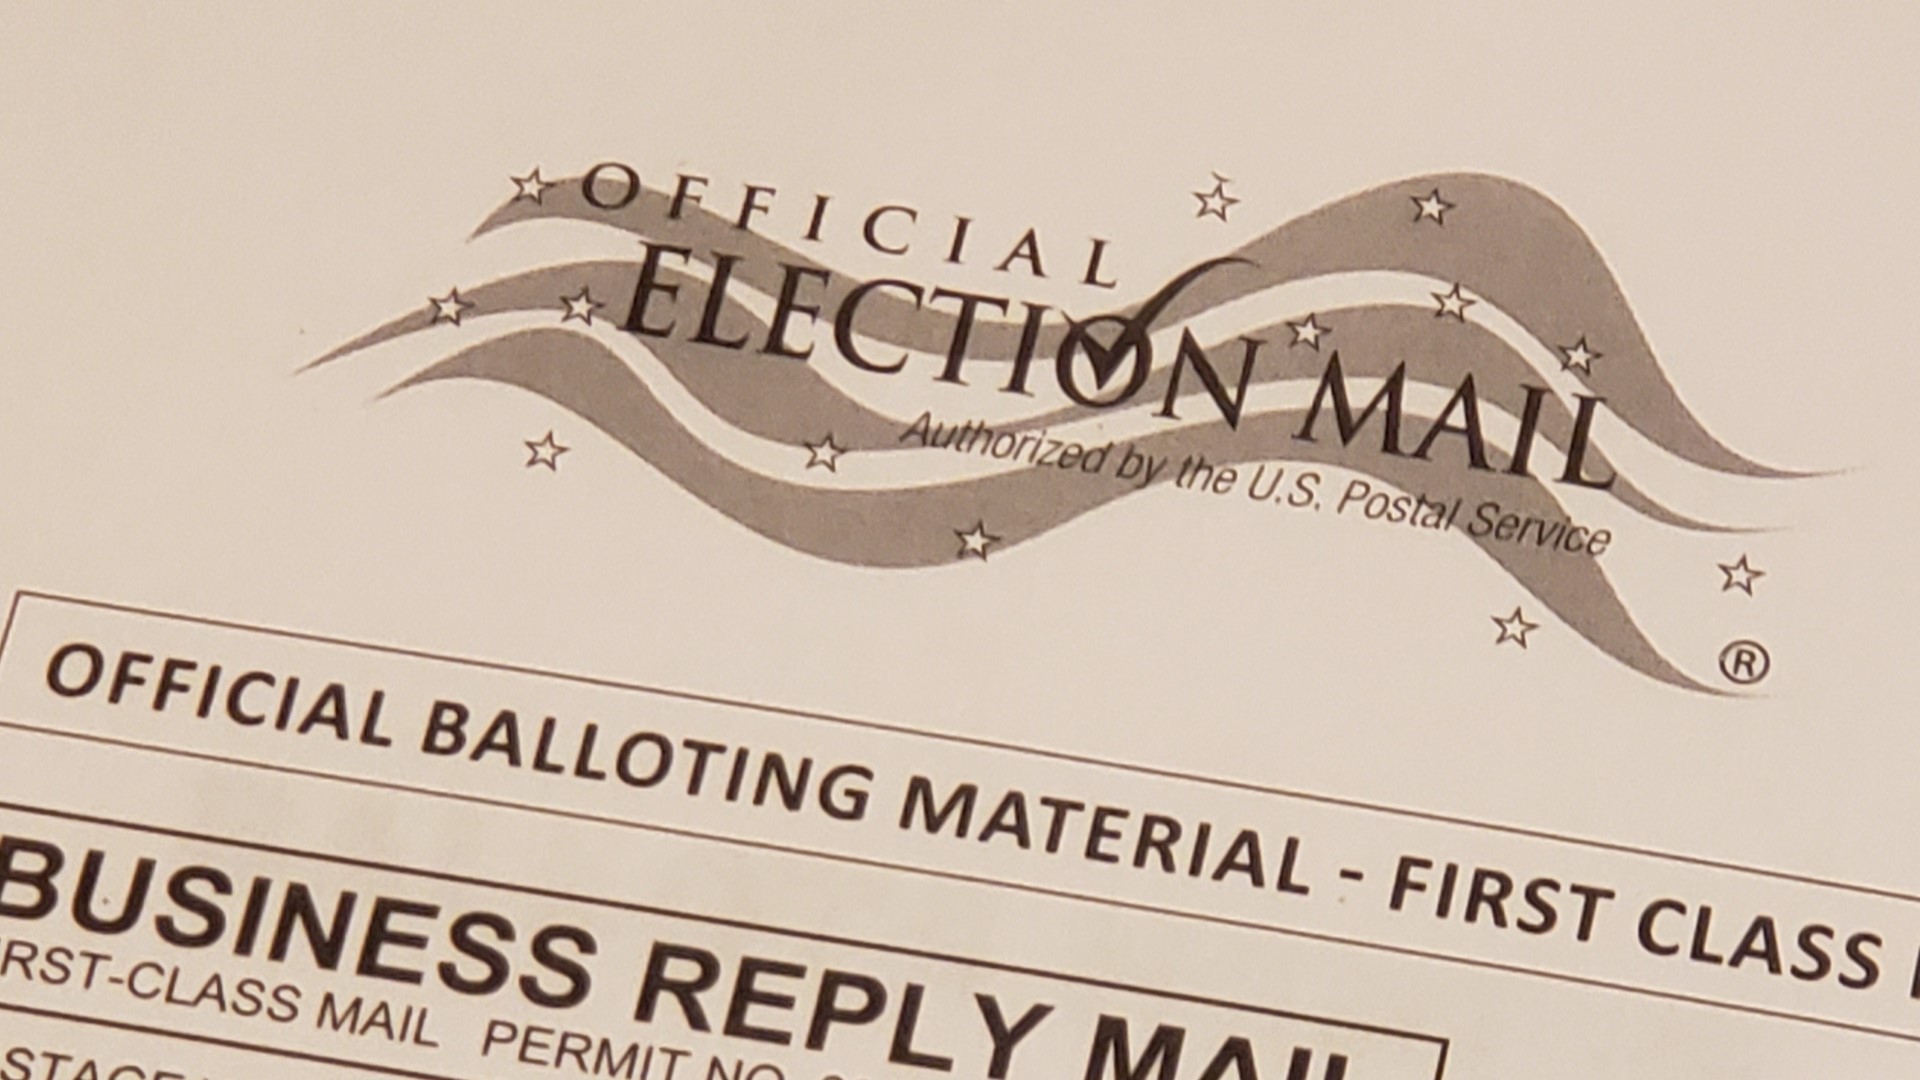 Here's how to make sure your absentee ballot doesn't get rejected.